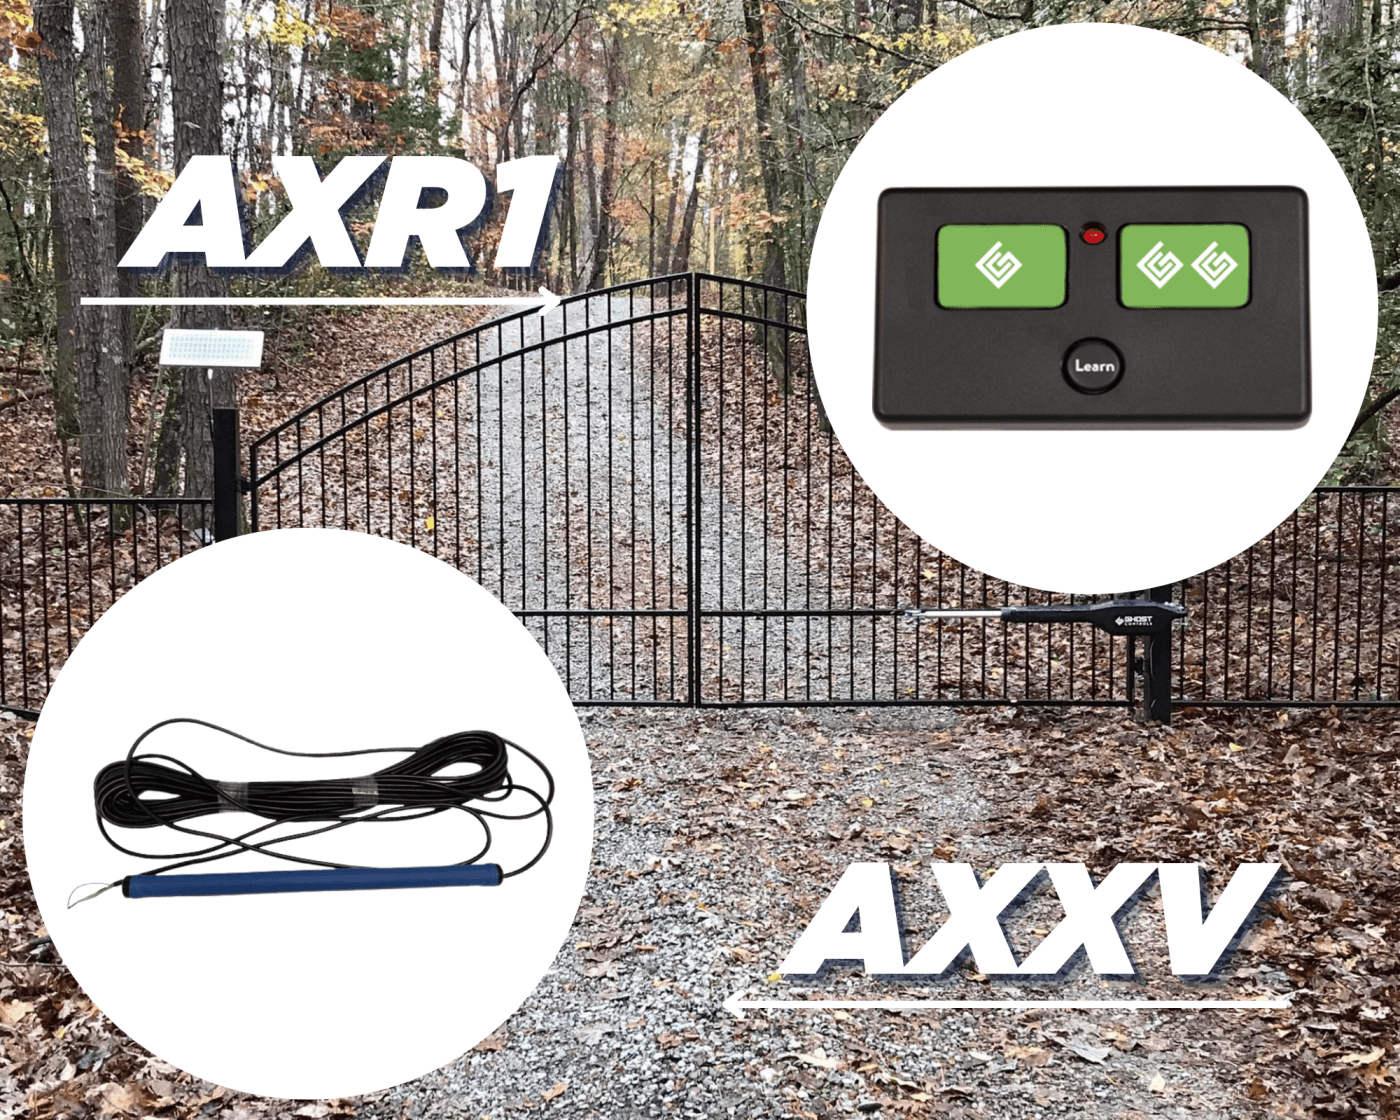 Installing A Water-Resistant Remote With A Wired Vehicle Sensor to Your Automatic Gate